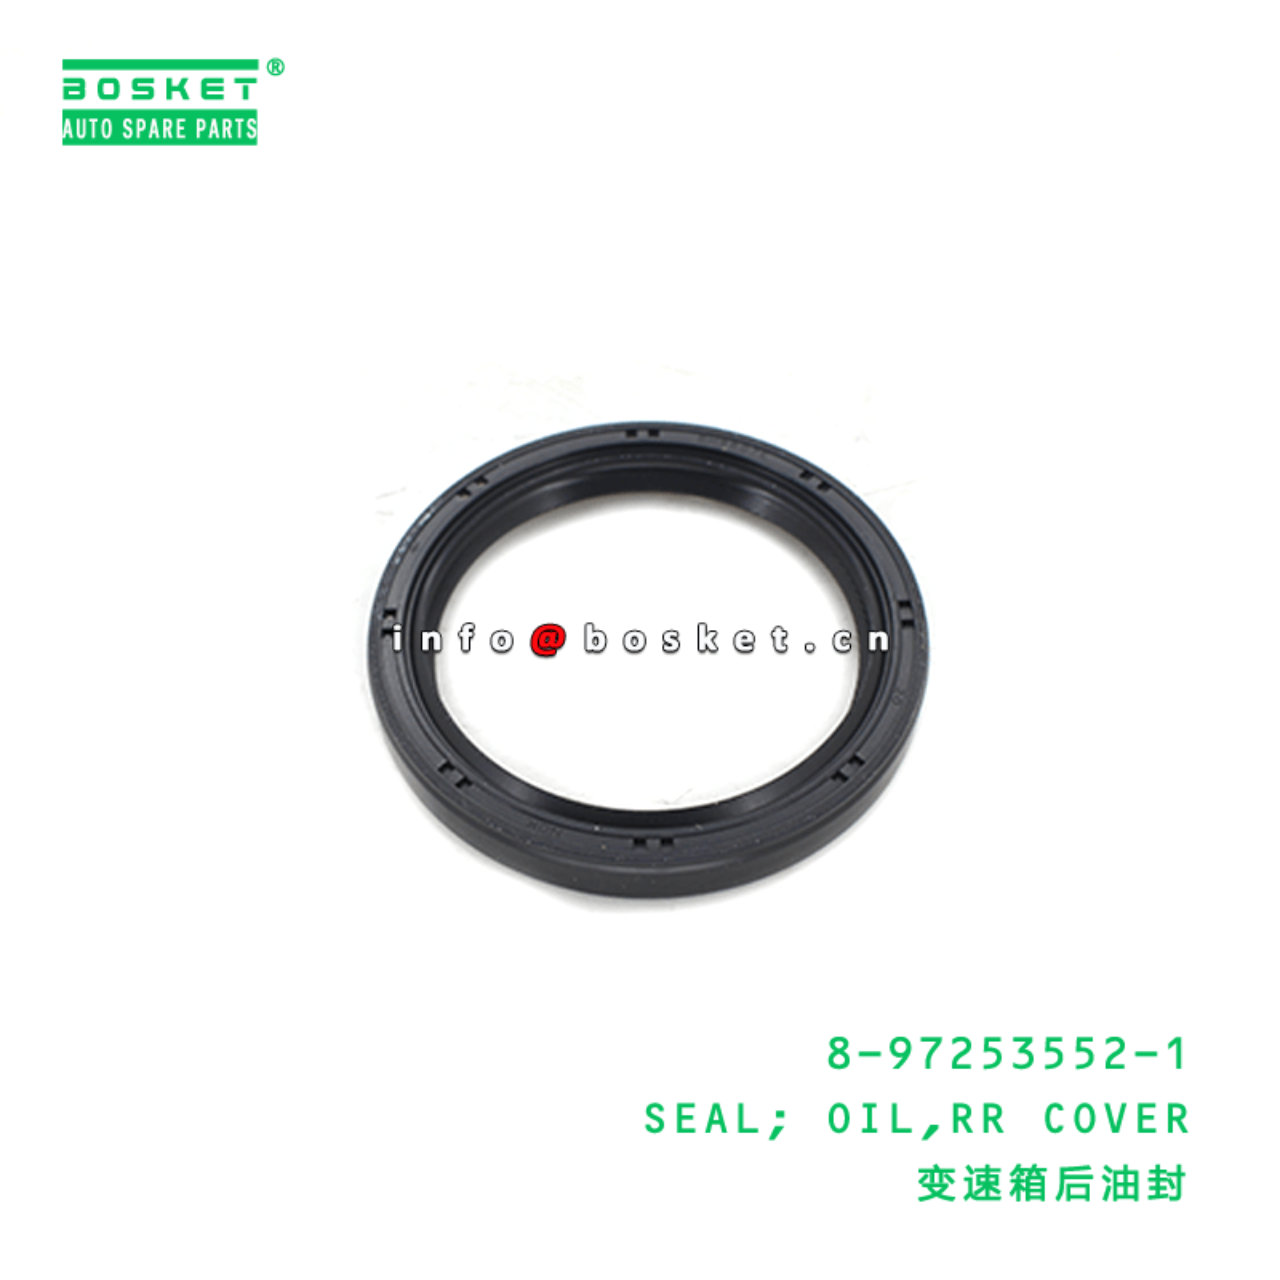  8-97253552-1 Rear Cover Oil Seal 8972535521 Suitable for ISUZU NKR77 4JH1 MYY5T 